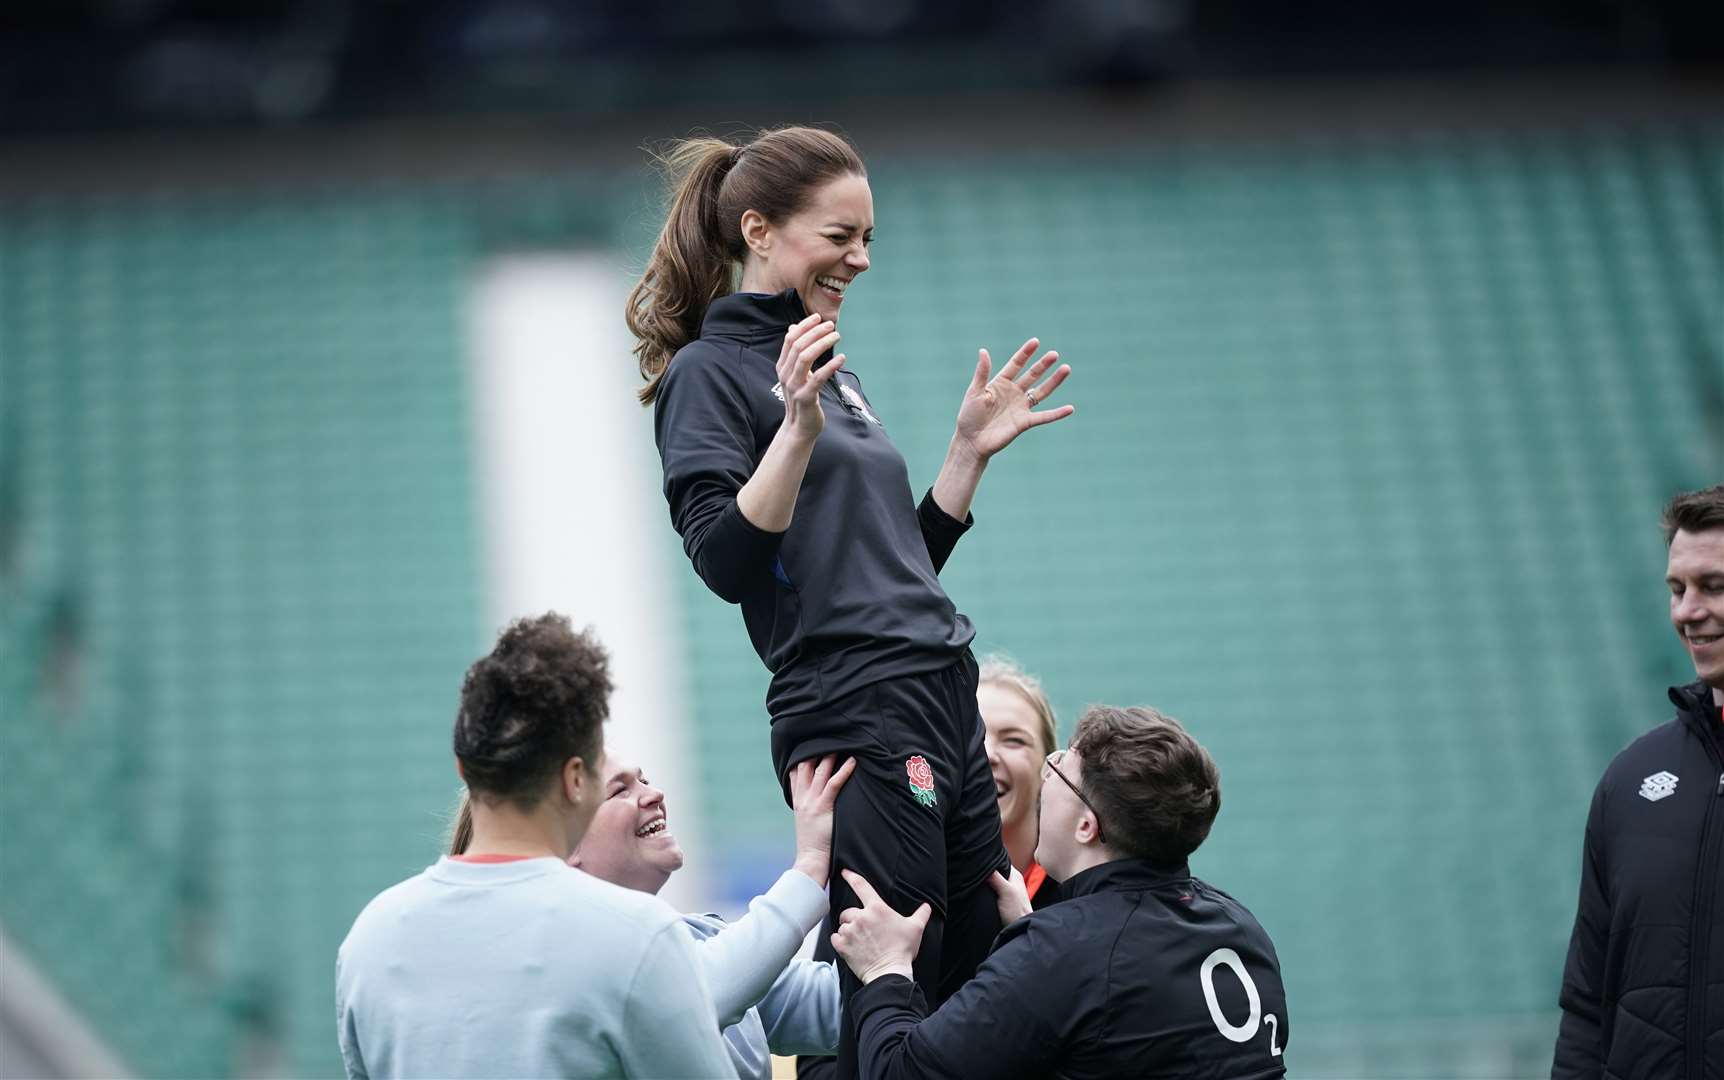 Kate is lifted up in a line-out as she plays rugby in her new role as patron of the Rugby Football Union during a visit to Twickenham Stadium (Yui Mok/PA)